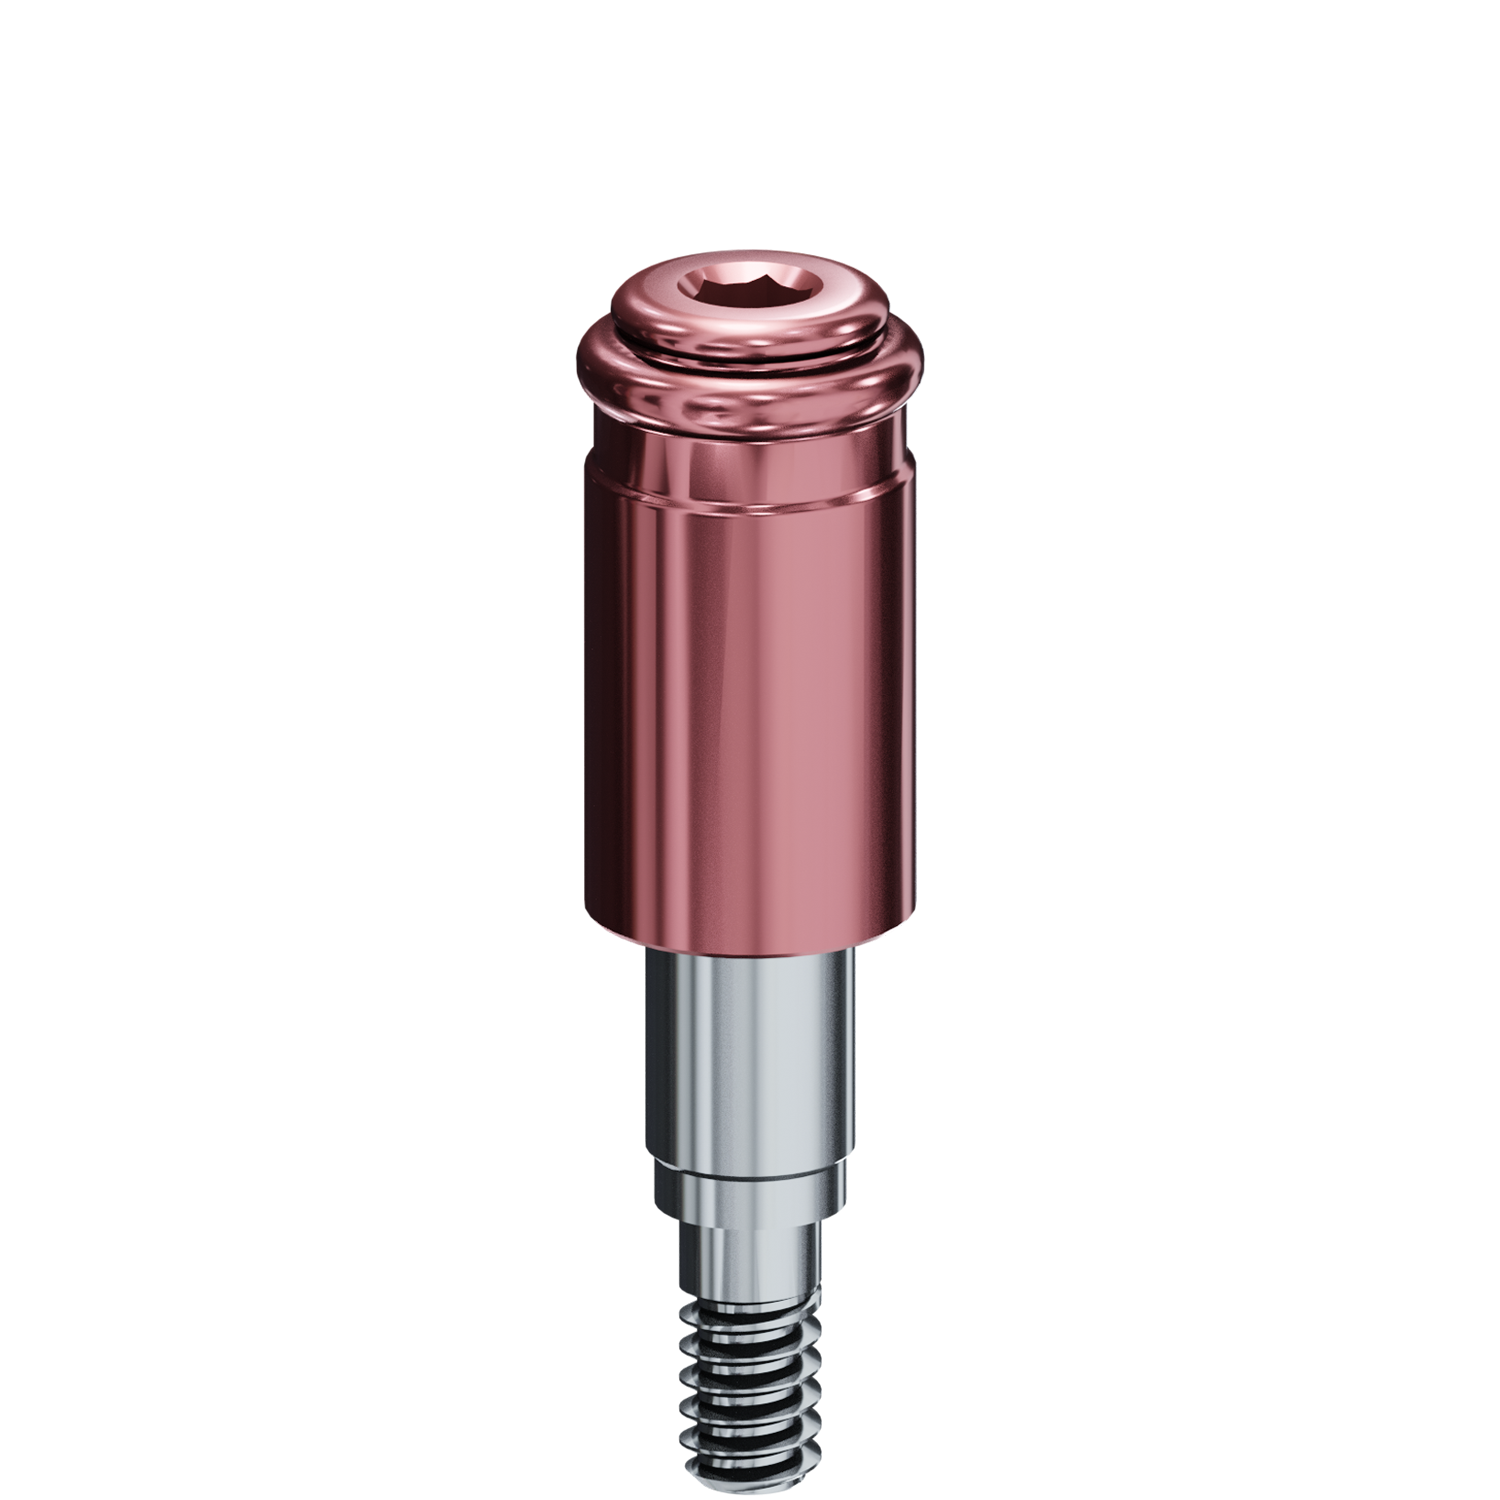 R-Tx Attachment System - 3.4mm Biomet 3i® Certain Connection - 048" Drive - 6.0mm